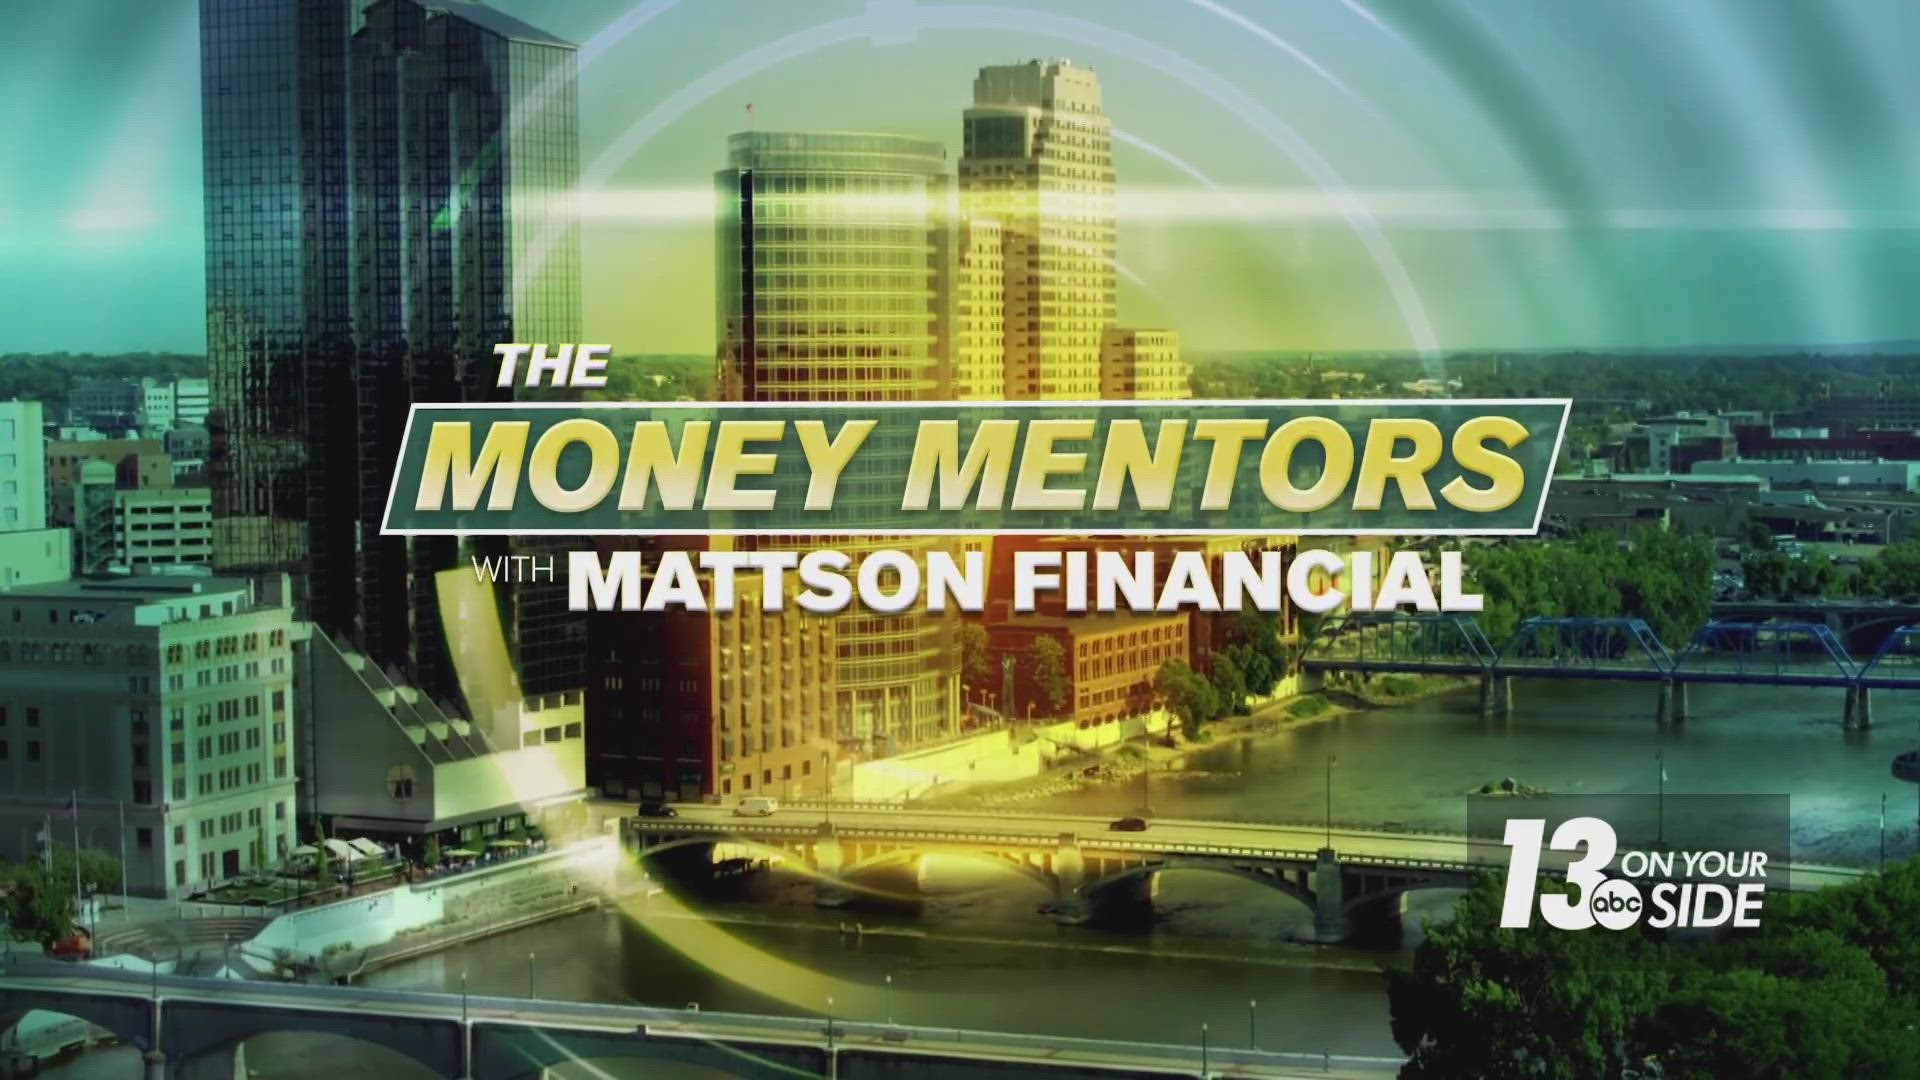 Our Money Mentors say there are ways to help prepare for and overcome those challenges.